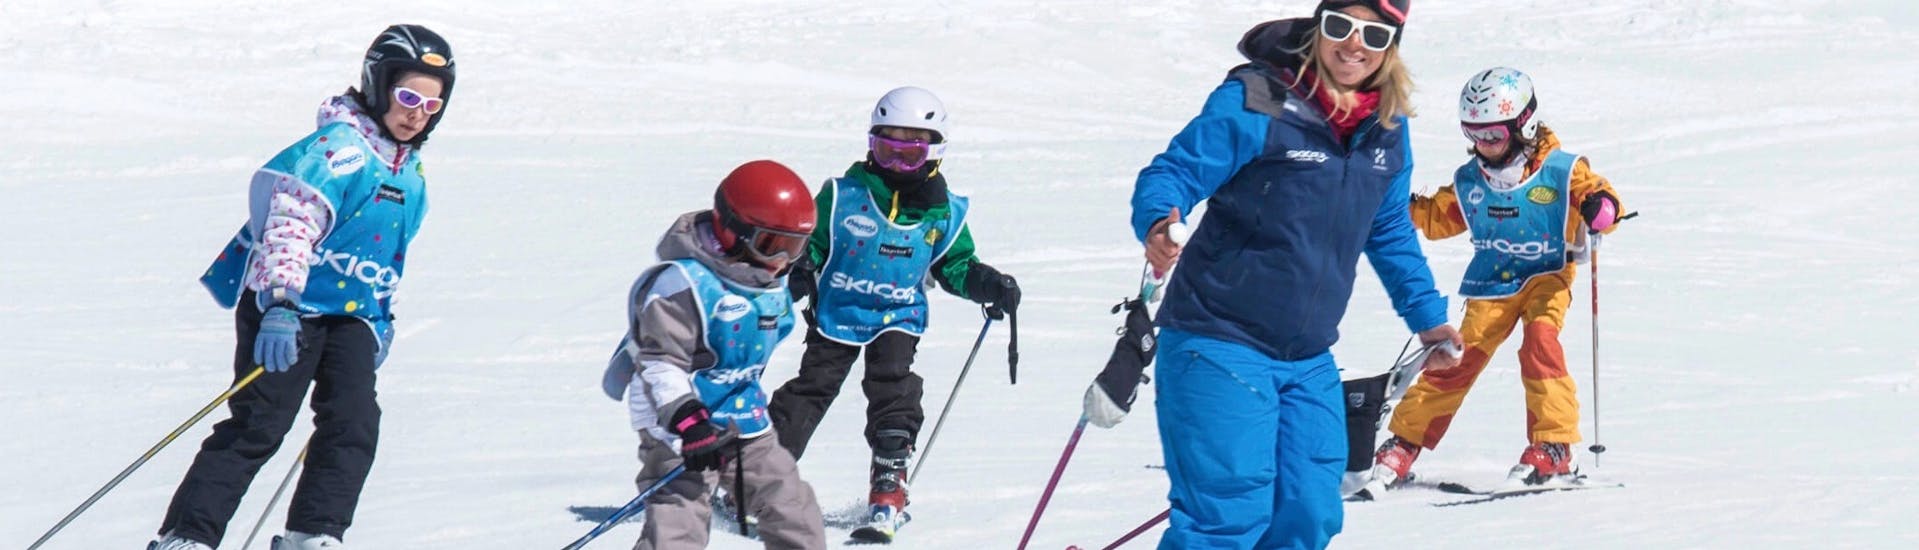 Kids are skiing down a slope during their Kids Ski Lessons (5-12 y.) - Cool 5 Kids with Ski Cool Val Thorens.